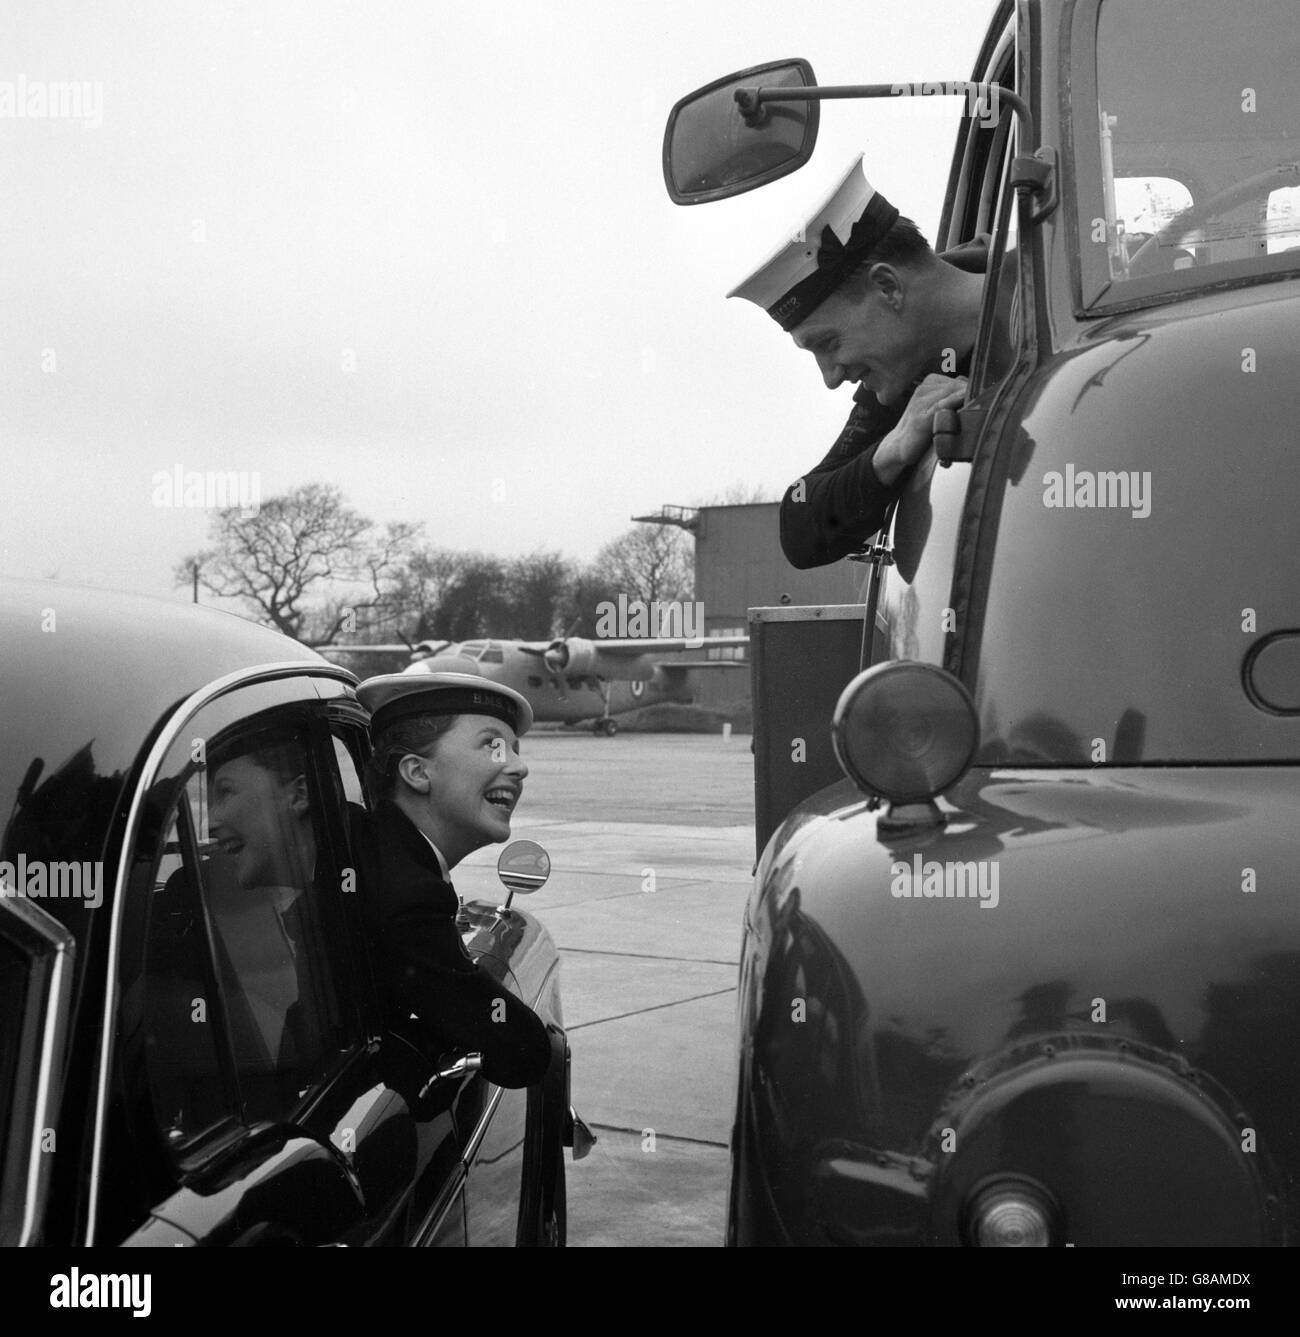 Leading Airman Sam Clarke and his wife, Leading Wren Janet Clarke, who both serve at the RNAS station HMS Daedalus at Lee-on-Solent, Hampshire. Sam, from Newtownards, Co. Down, drives heavy vehicles, including the station fire engine. Janet, whose home town is Chepstow, is chauffeuse for Vice-Admiral DCEF Gibson, Flag Officer Naval Air Command. In 1961, Sam was driver for the Admiral when he was in command of the carrier Ark Royal. Stock Photo